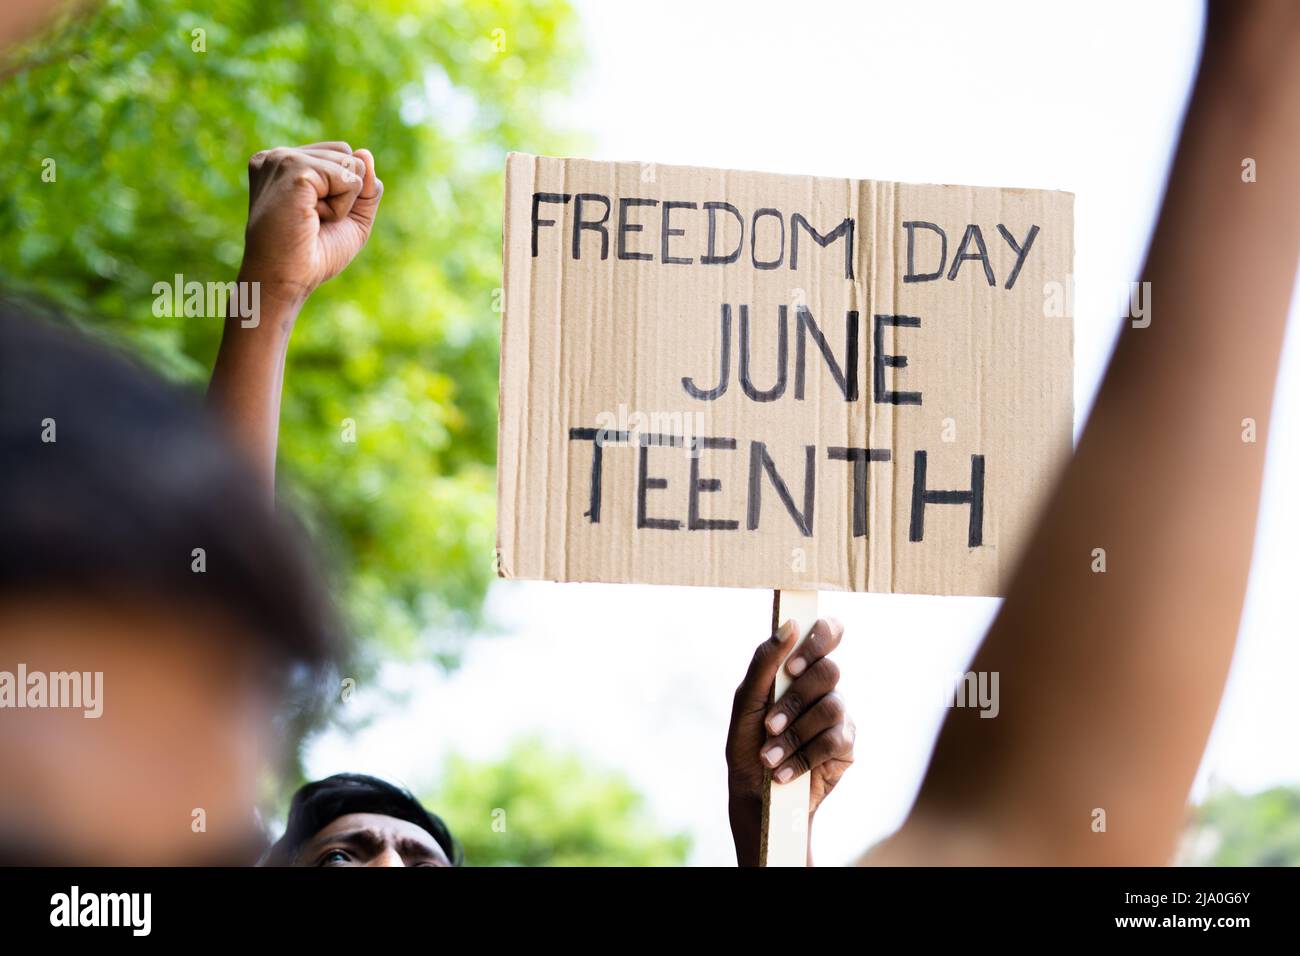 concept of Juneteenth freedom day march showing by close up protesting hands sign board - concept of activism, justice and demonstration Stock Photo